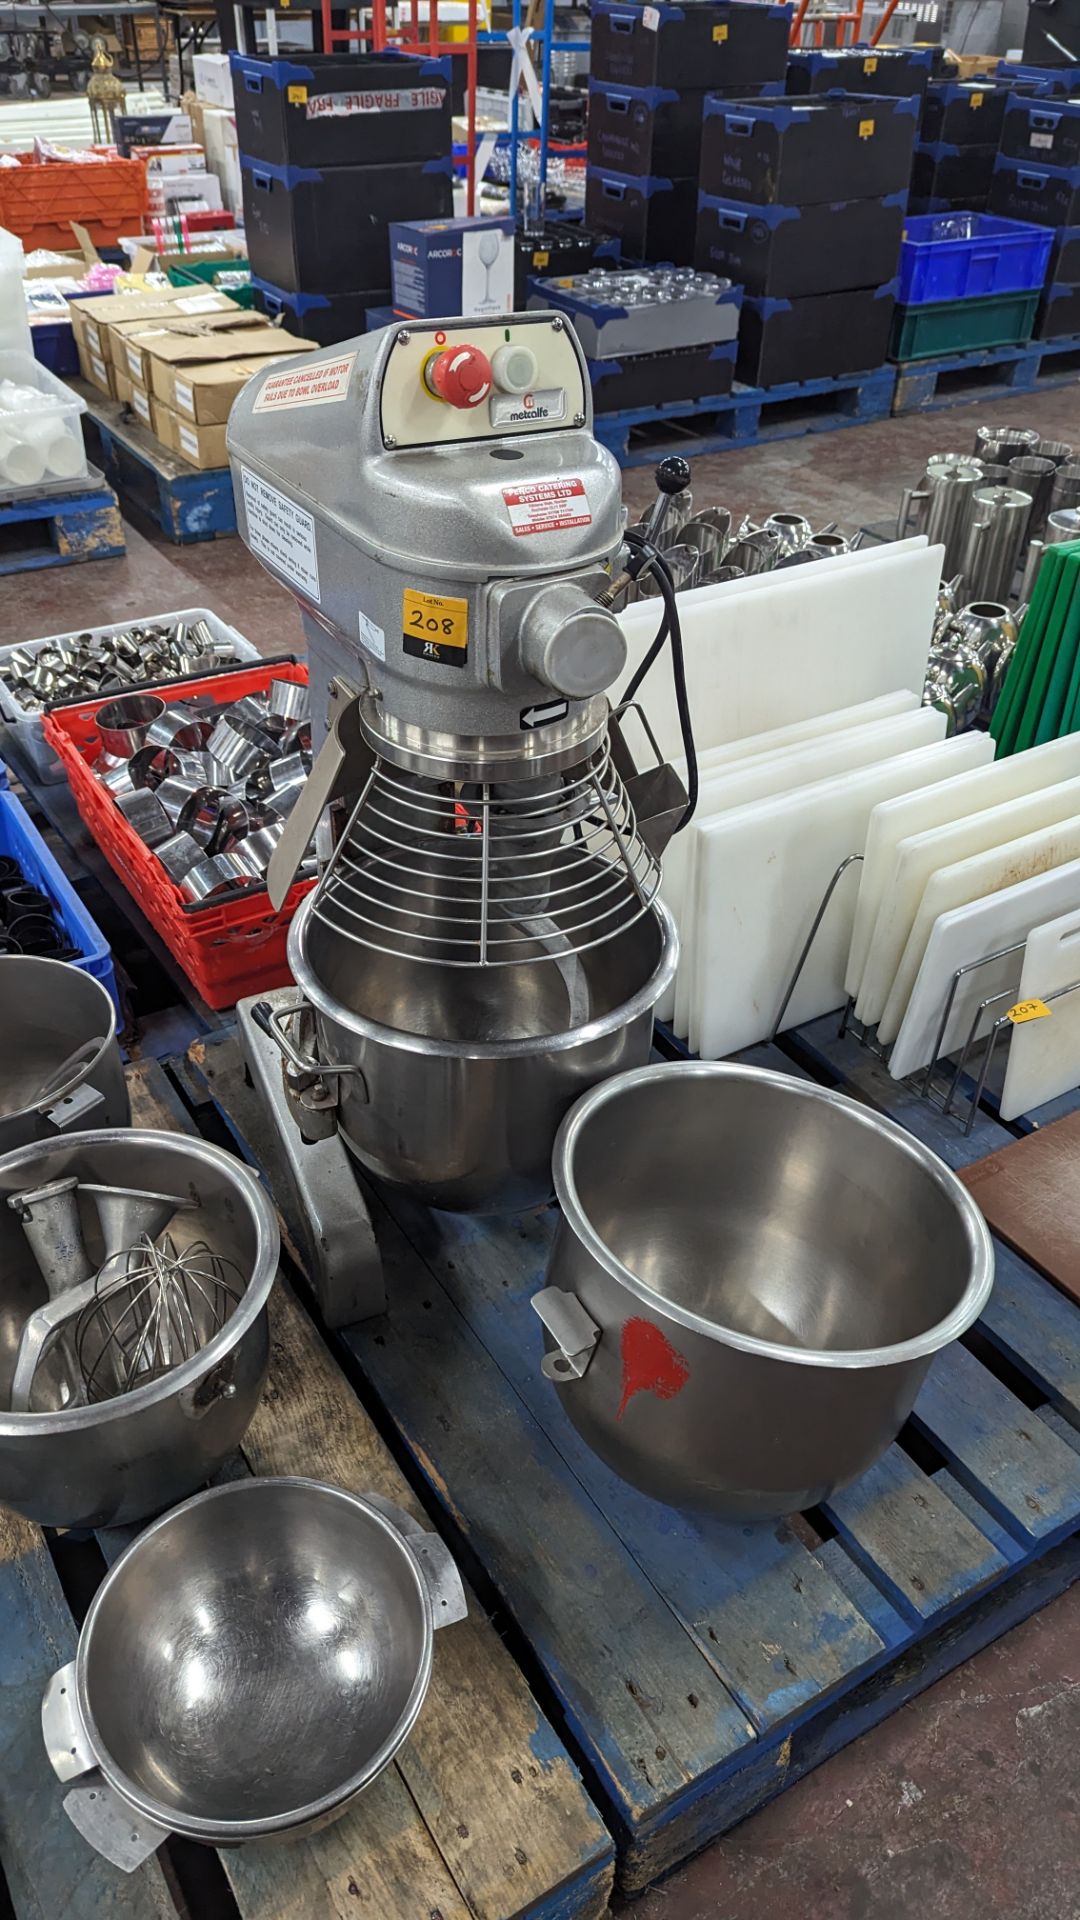 Metcalfe heavy duty commercial food mixer including quantity of bowls, blades, paddles & similar - Image 9 of 11